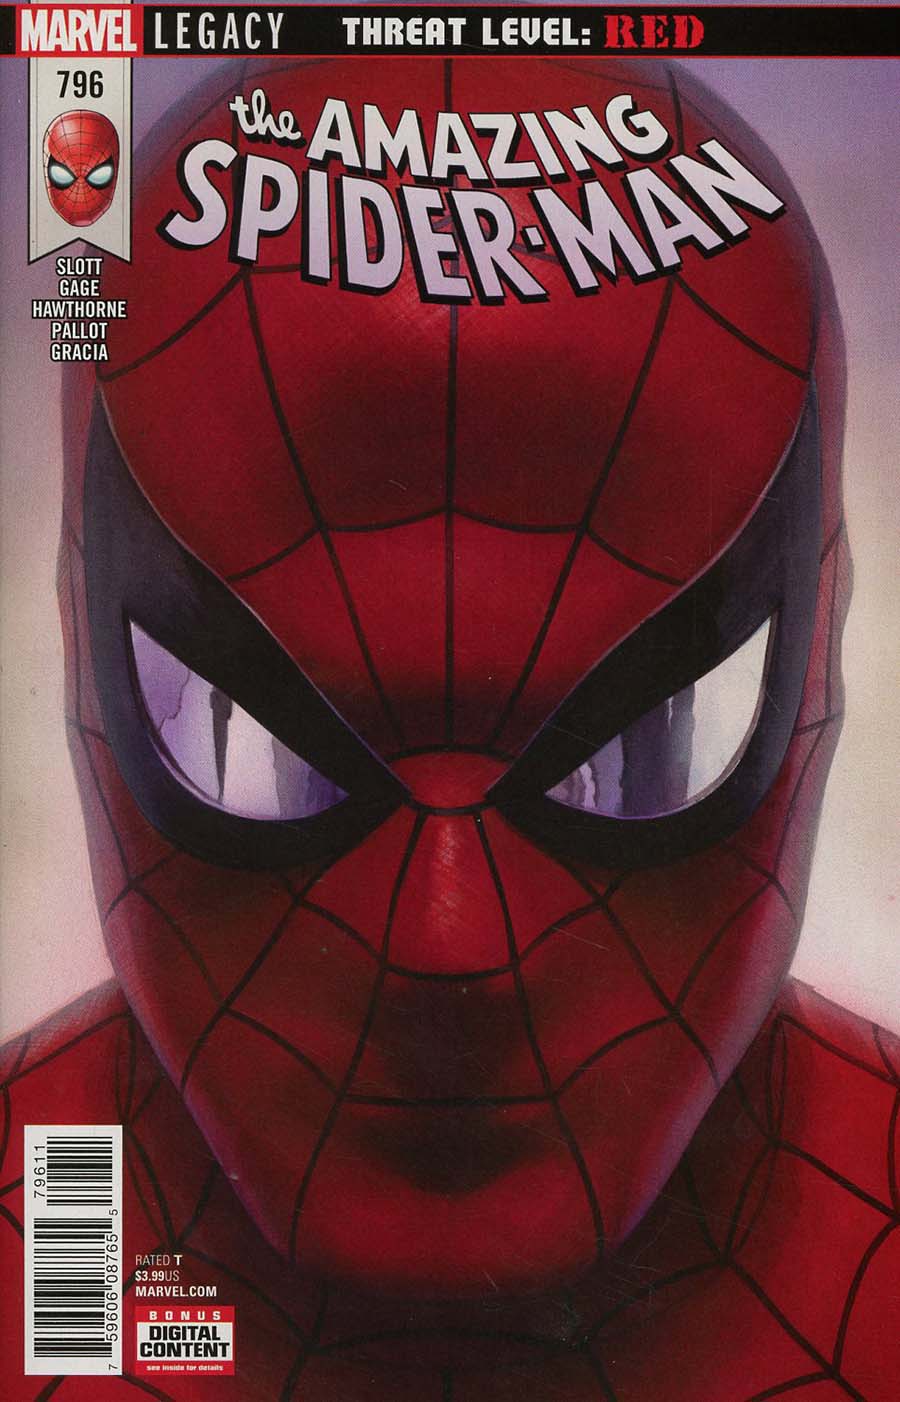 Amazing Spider-Man Vol 4 #796 Cover A 1st Ptg (Marvel Legacy Tie-In)